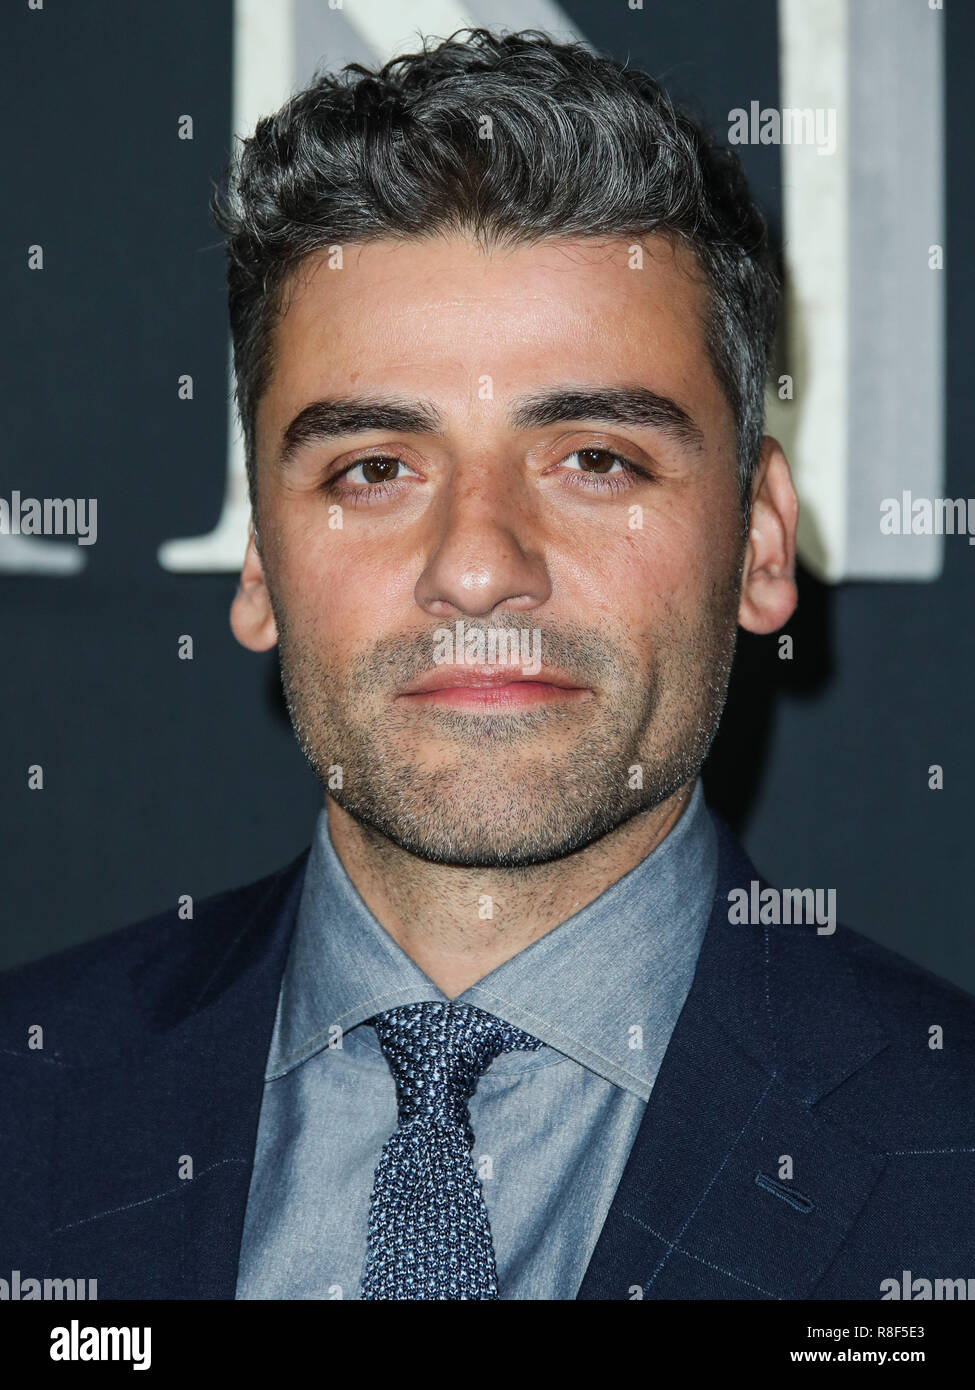 WESTWOOD, LOS ANGELES, CA, USA - FEBRUARY 13: Oscar Isaac at the Los Angeles Premiere Of Paramount Pictures' 'Annihilation' held at the Regency Village Theatre on February 13, 2018 in Westwood, Los Angeles, California, United States. (Photo by Xavier Collin/Image Press Agency) Stock Photo